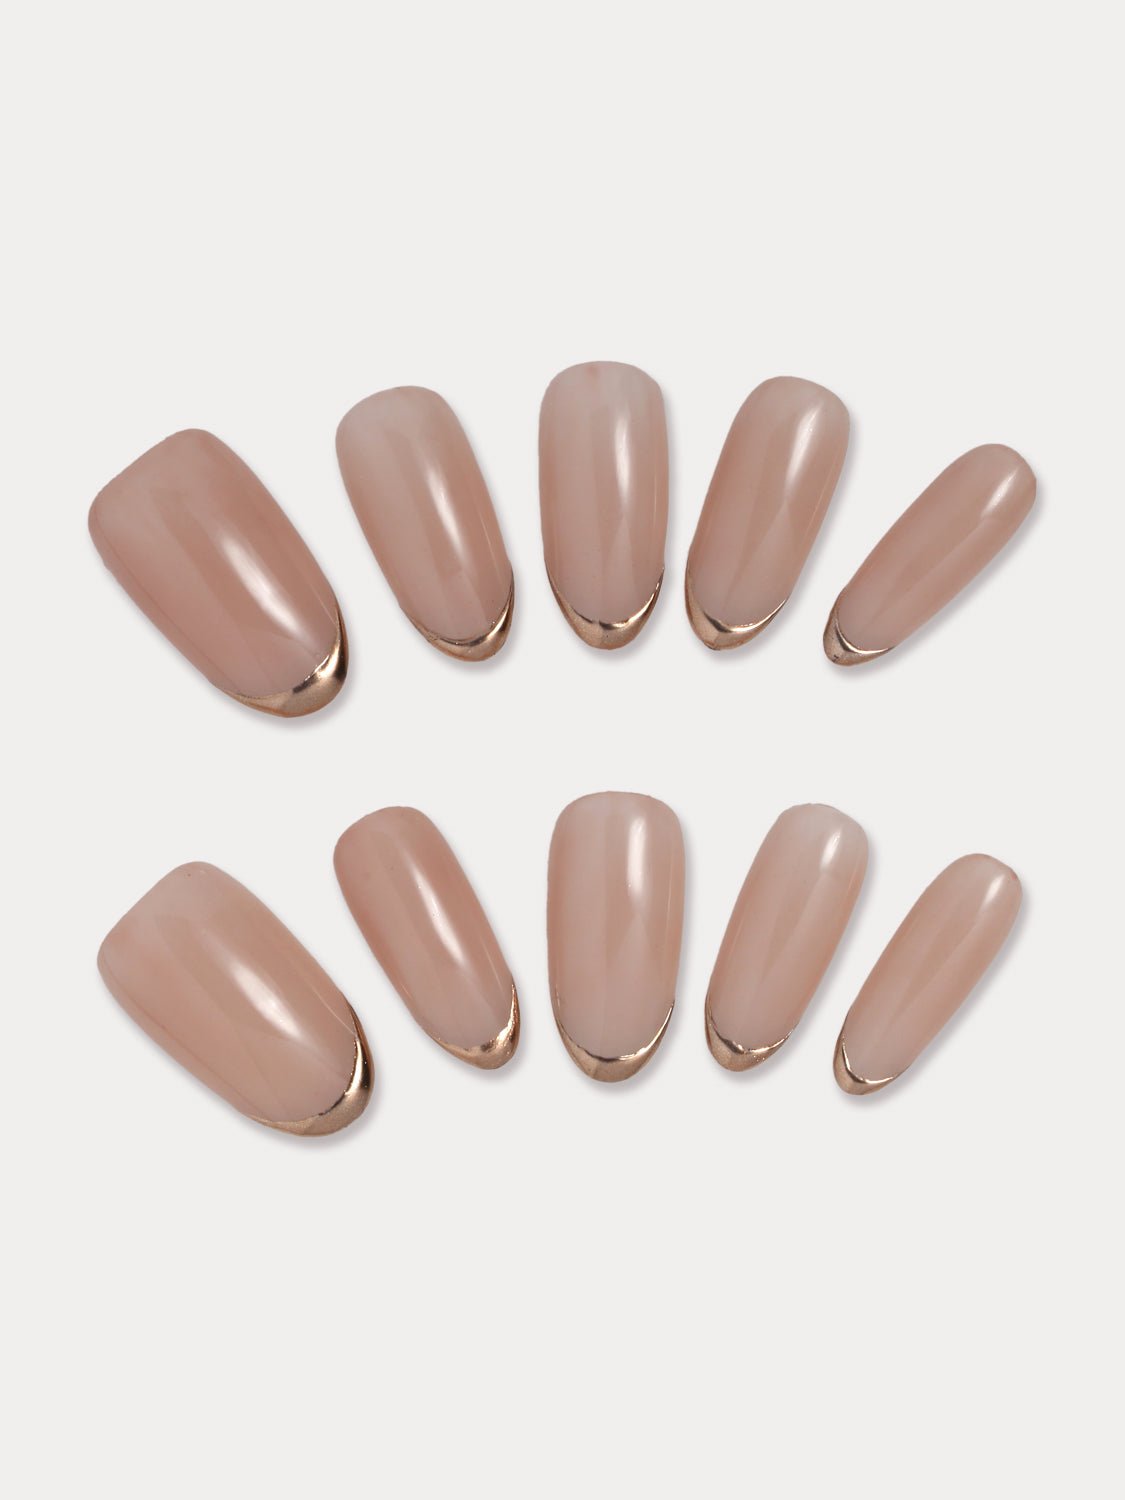 How to Find the Best Nail Shape for You - L'Oréal Paris